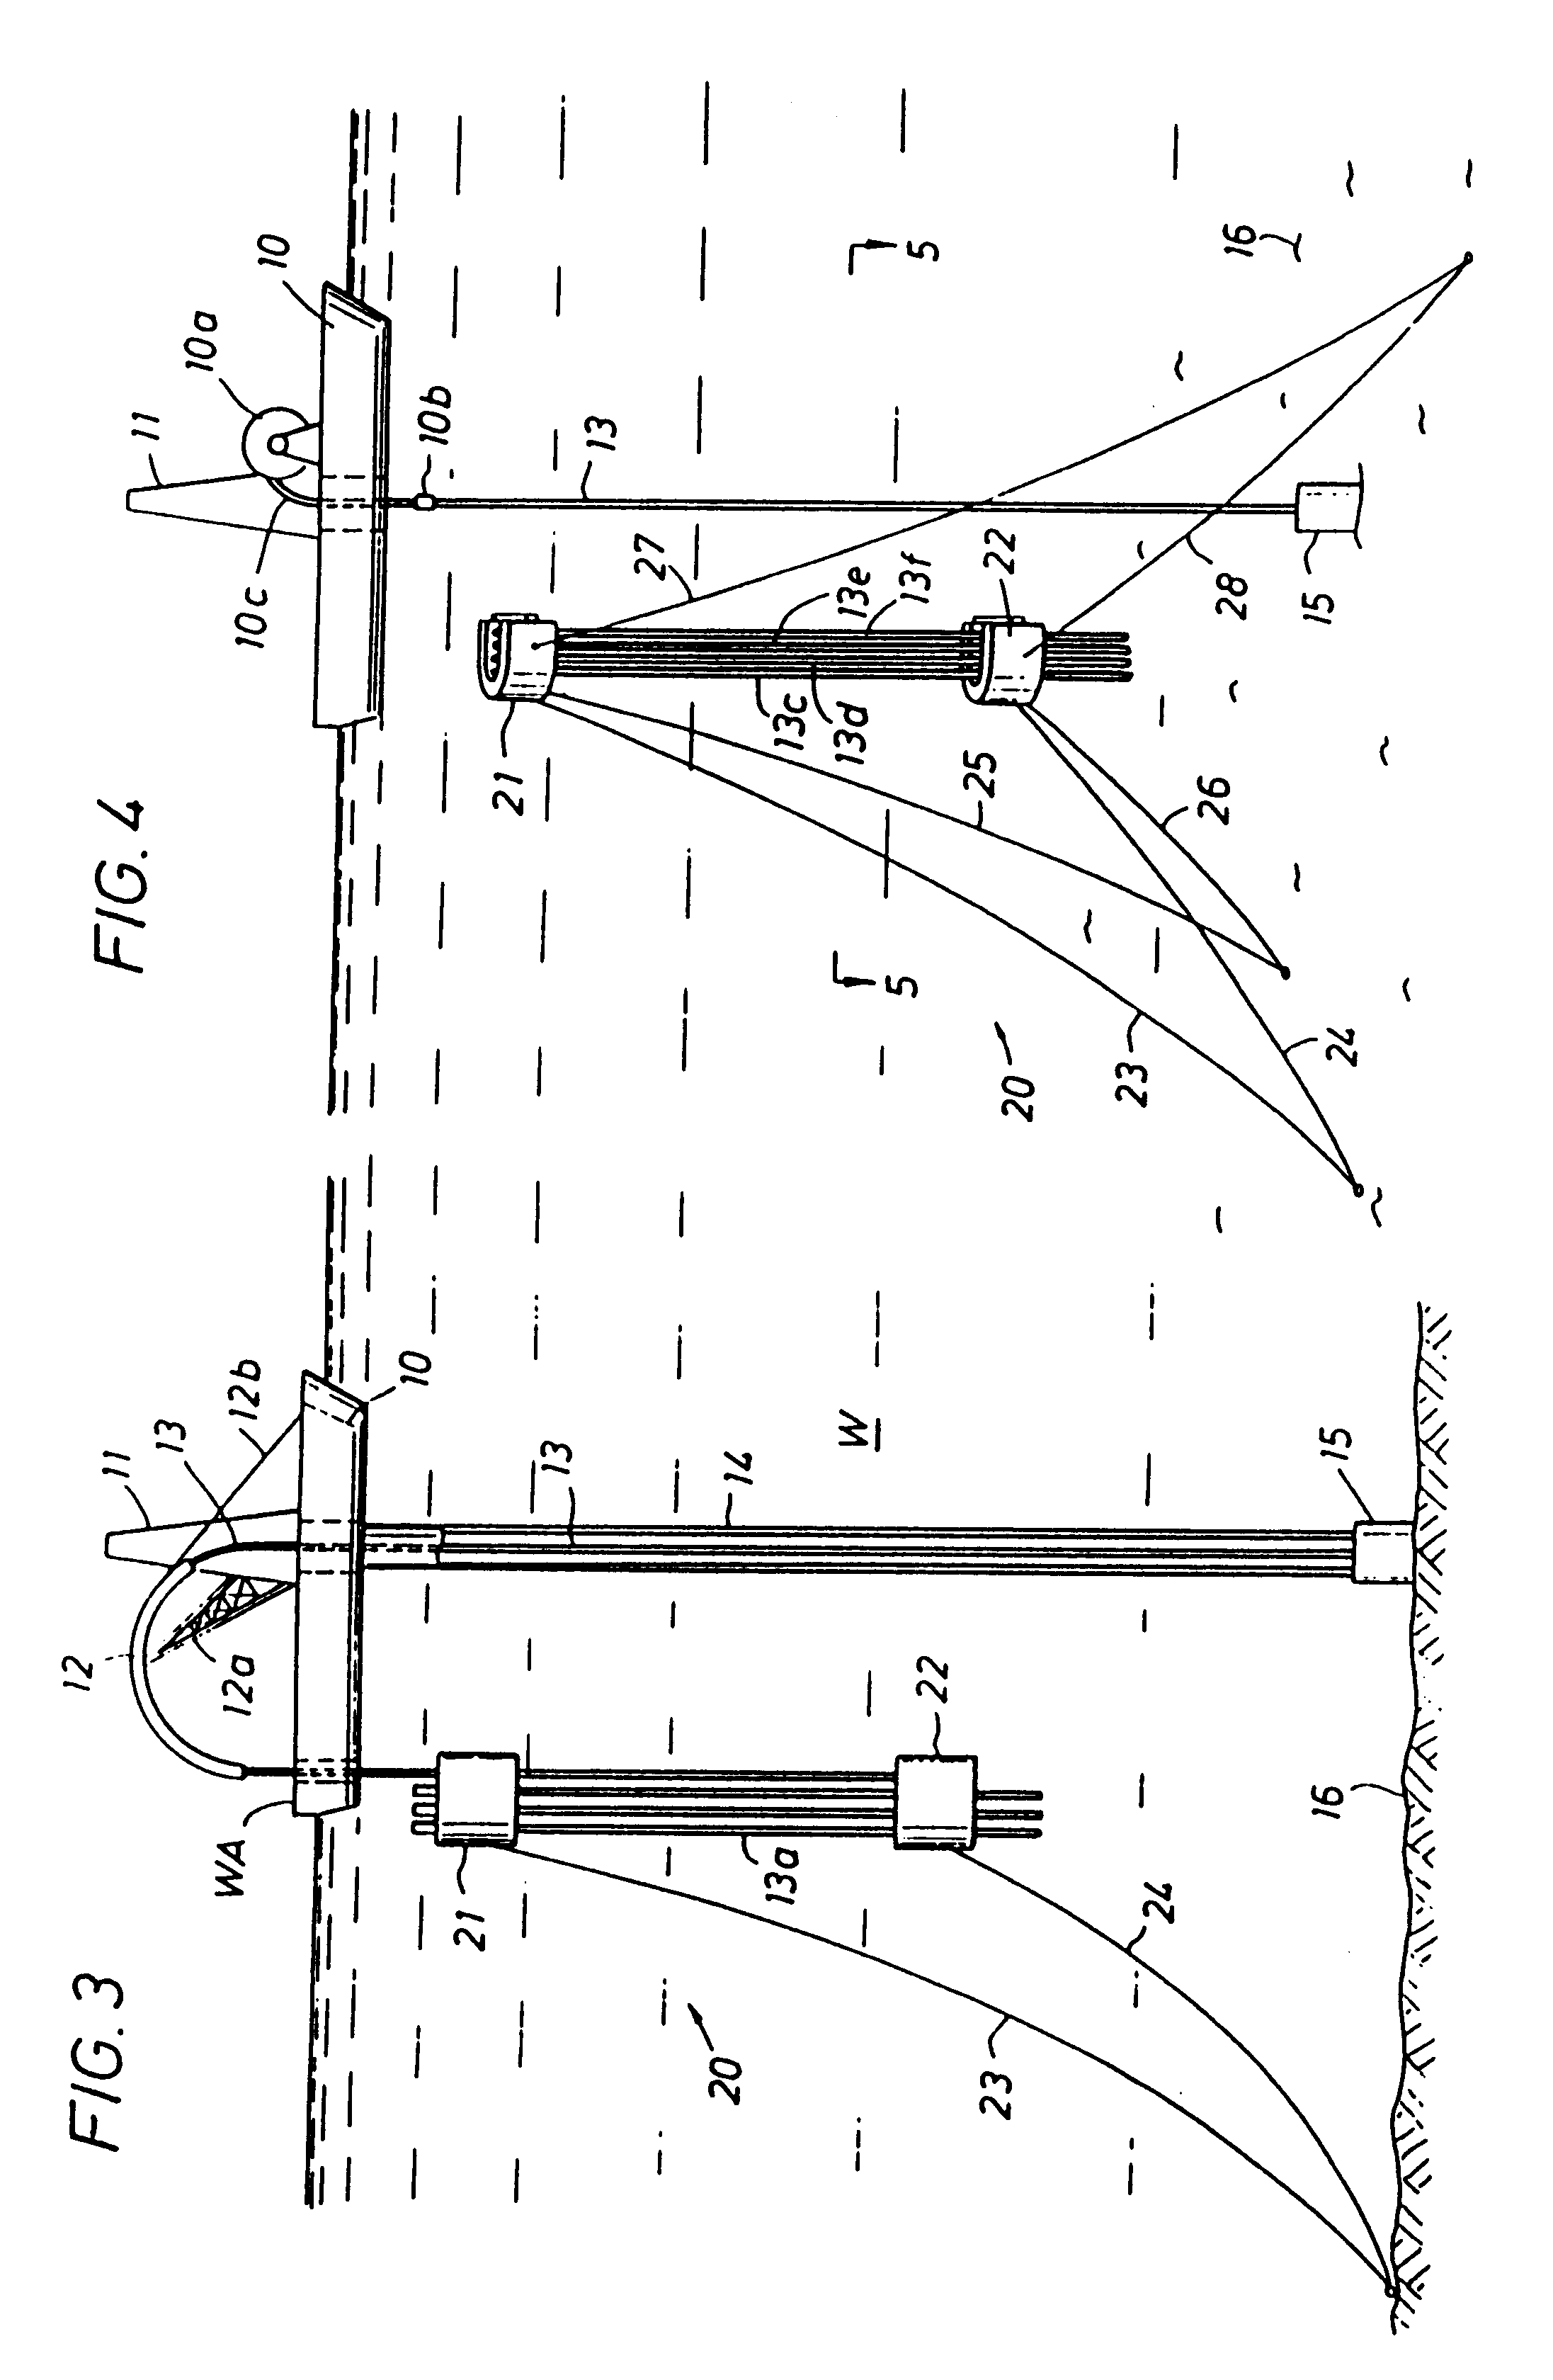 Apparatus system and method for installing and retrieving pipe in a well